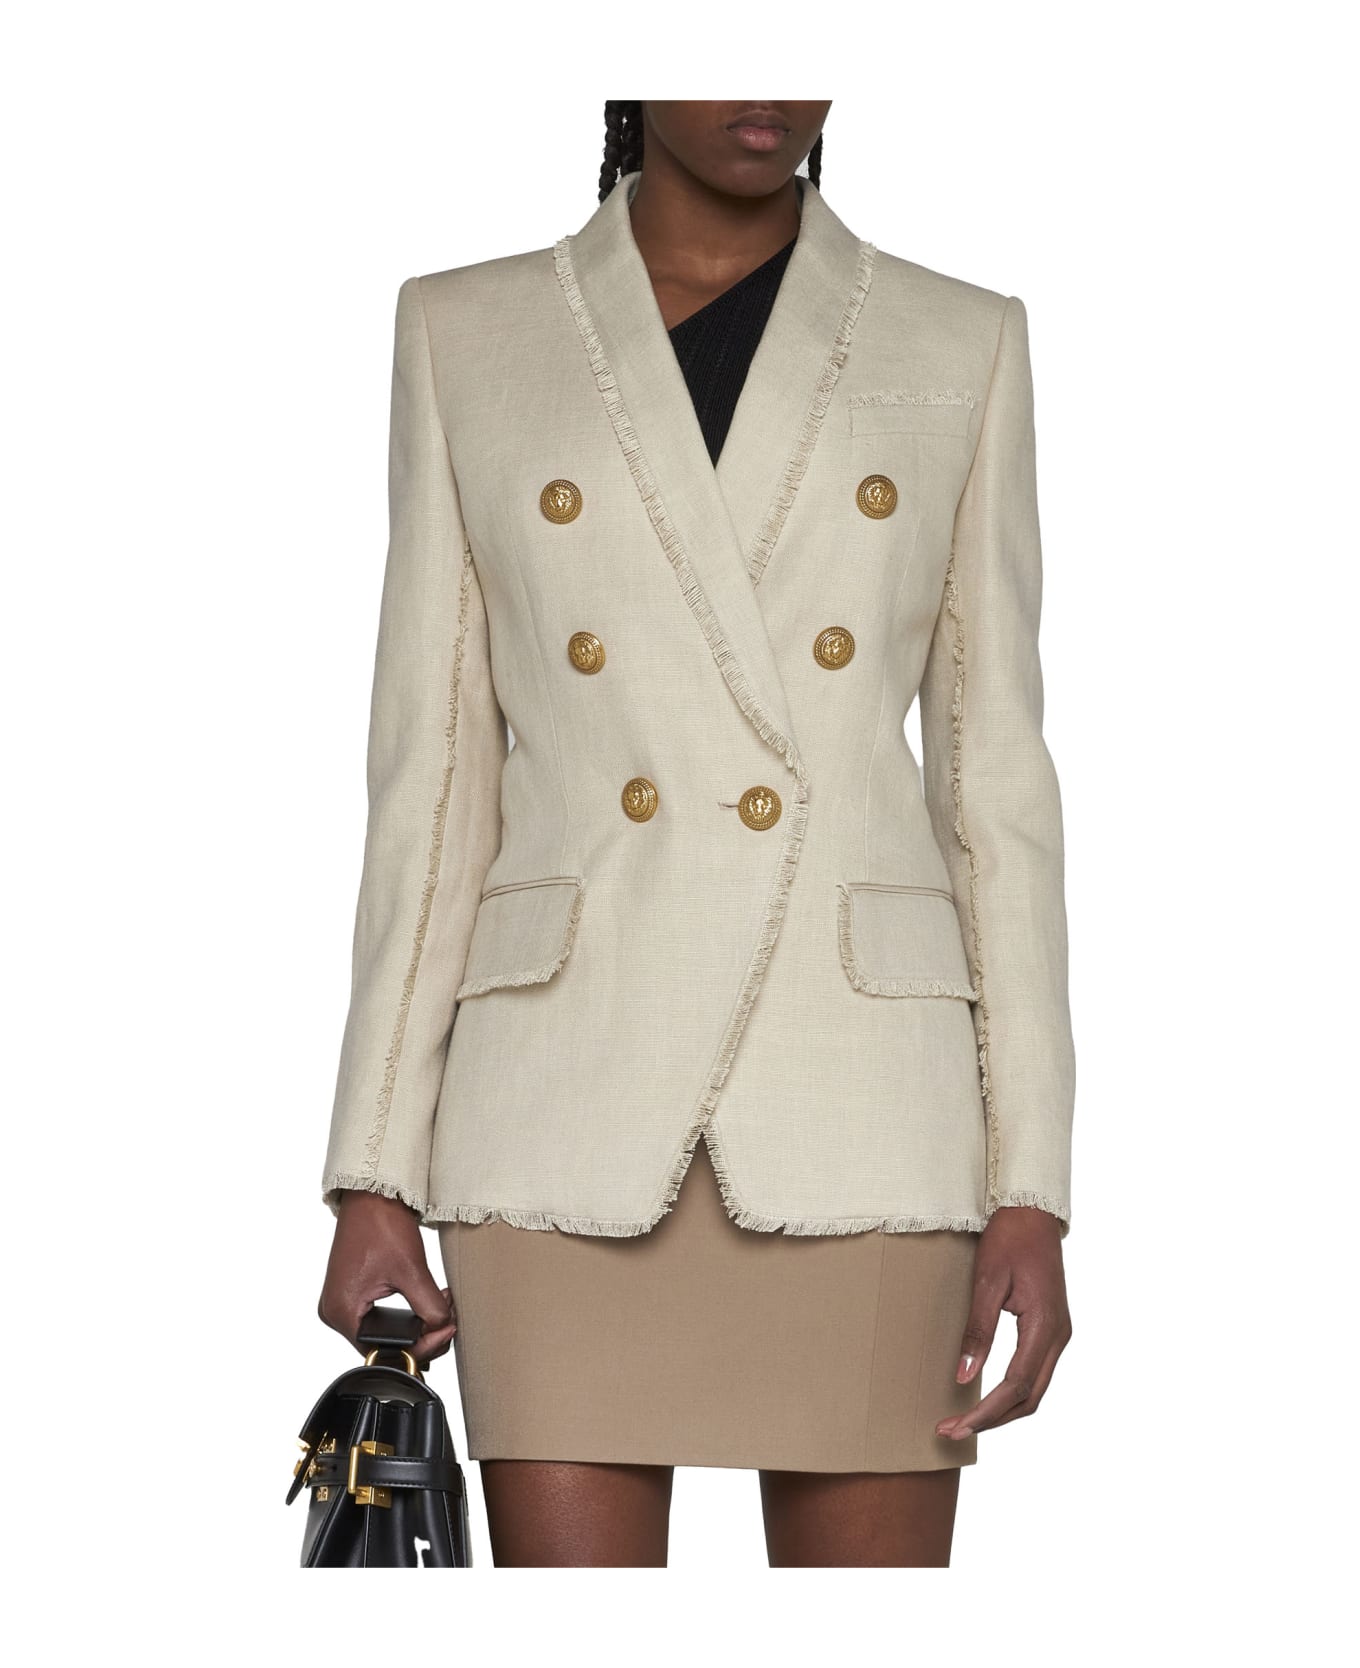 Balmain Double-breasted Fray-trimmed Blazer - Beige